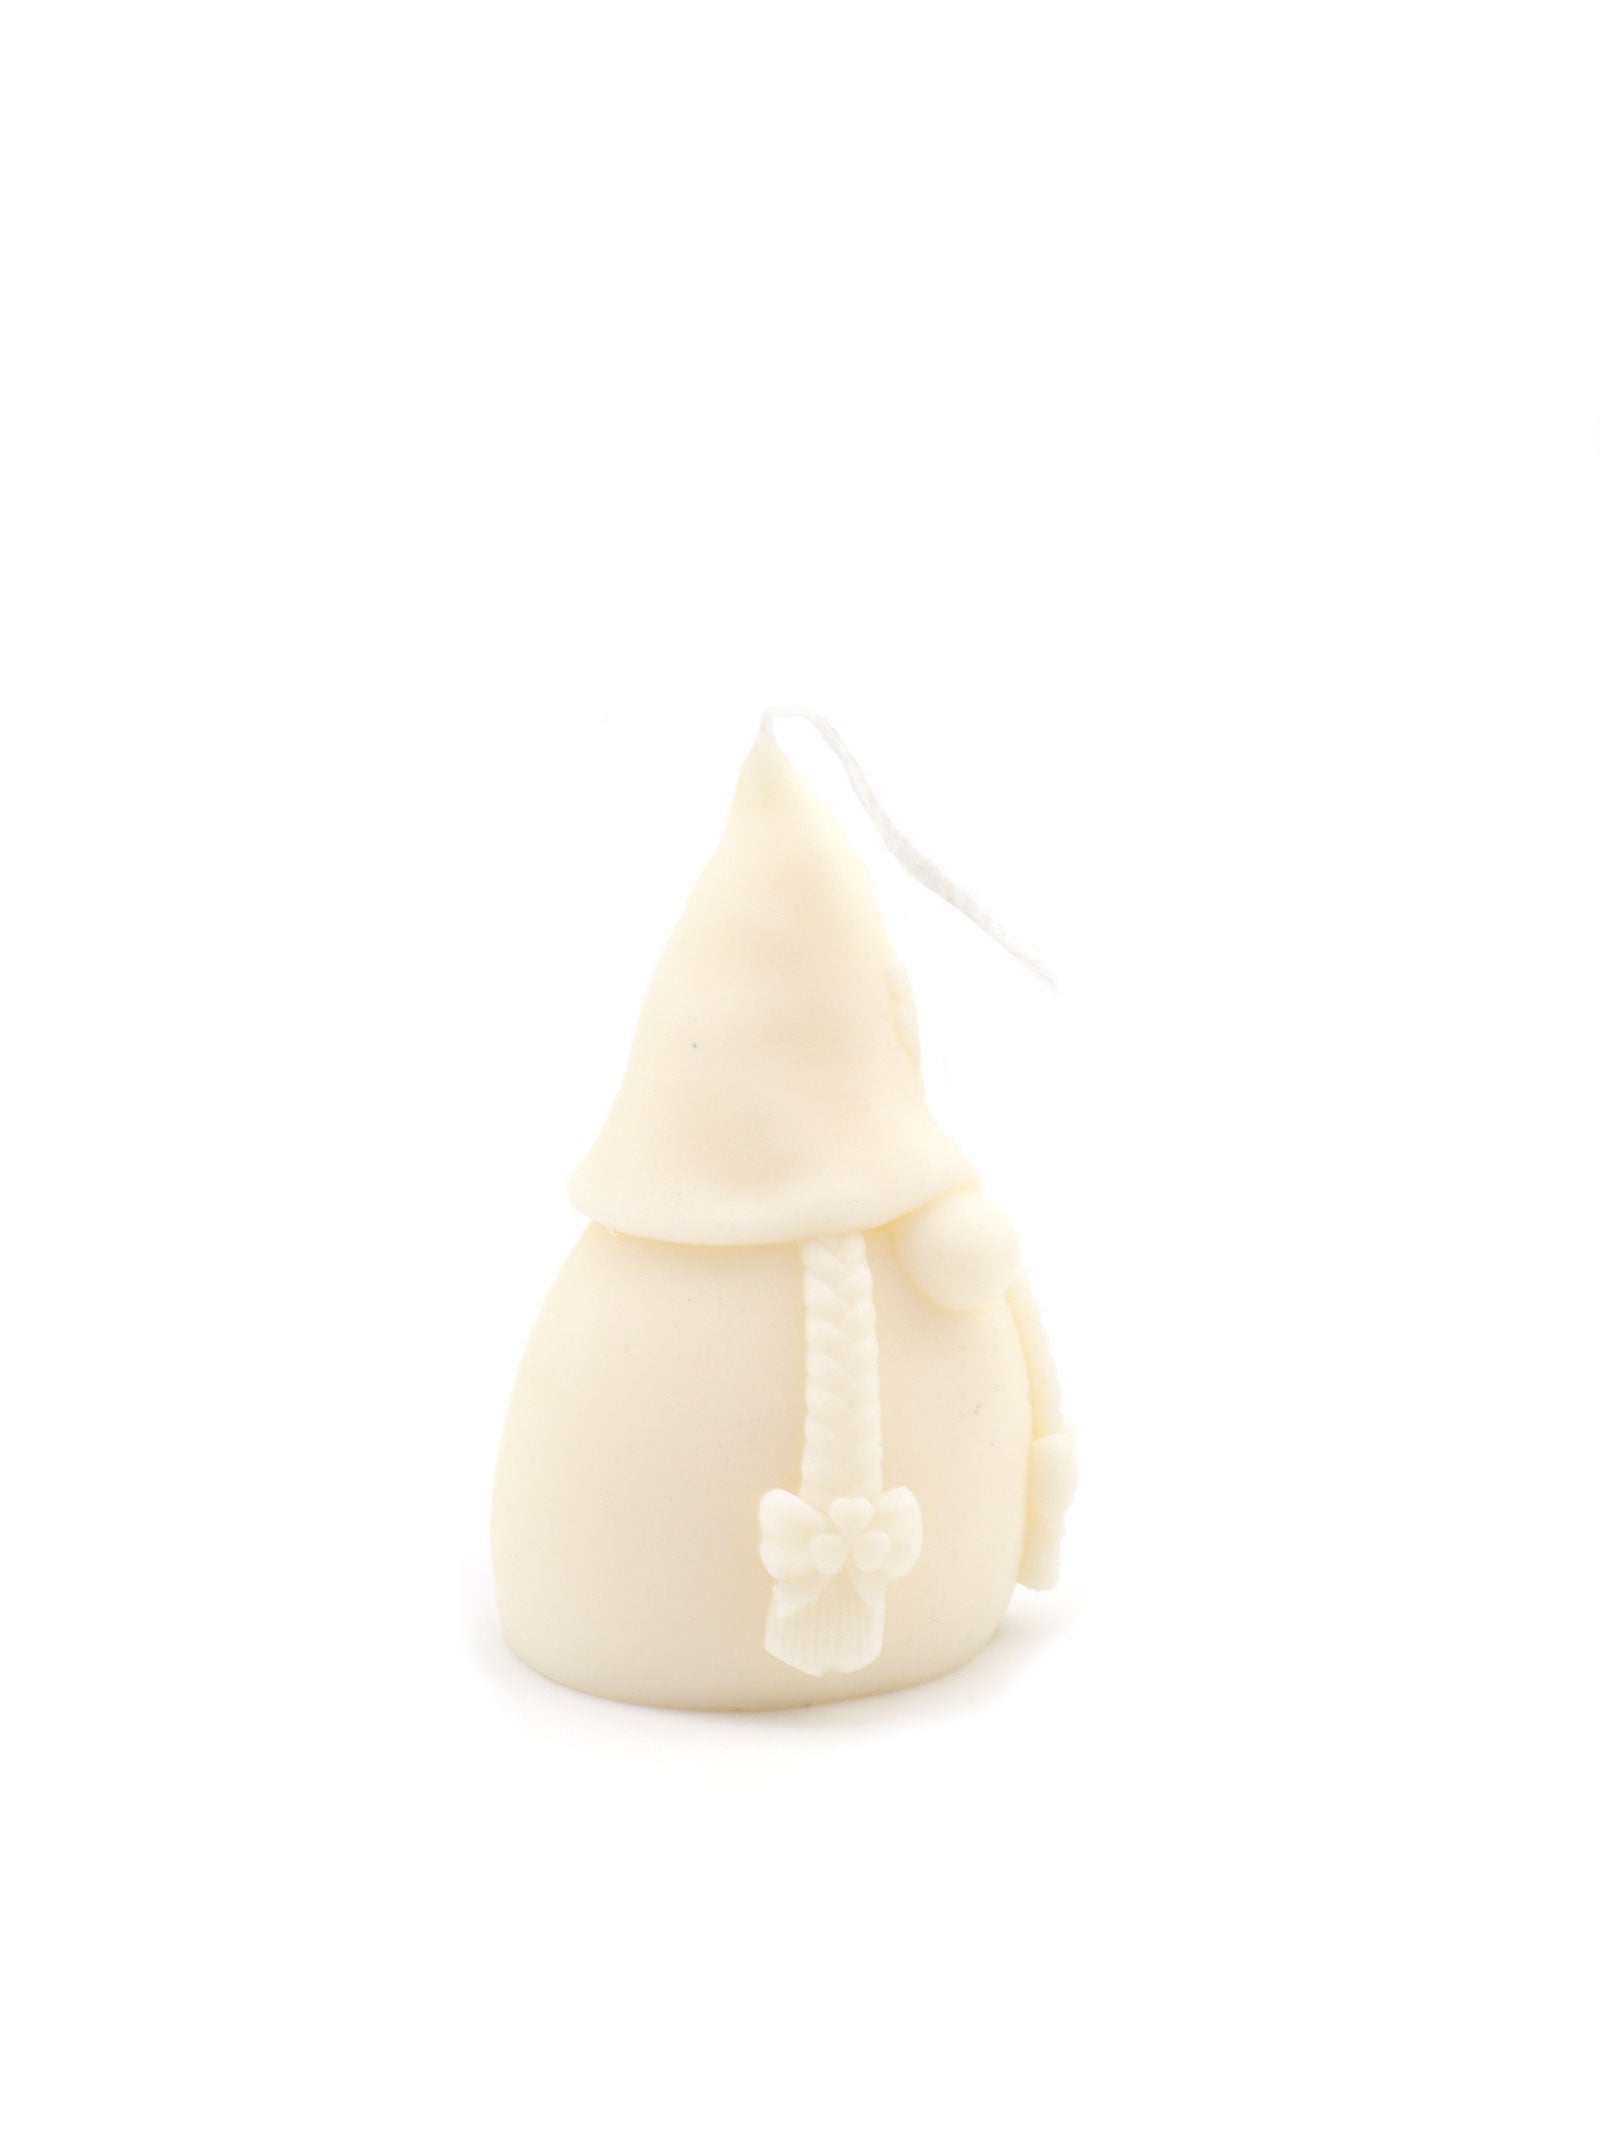 HANDMADE GNOME SOY WAX CANDLE